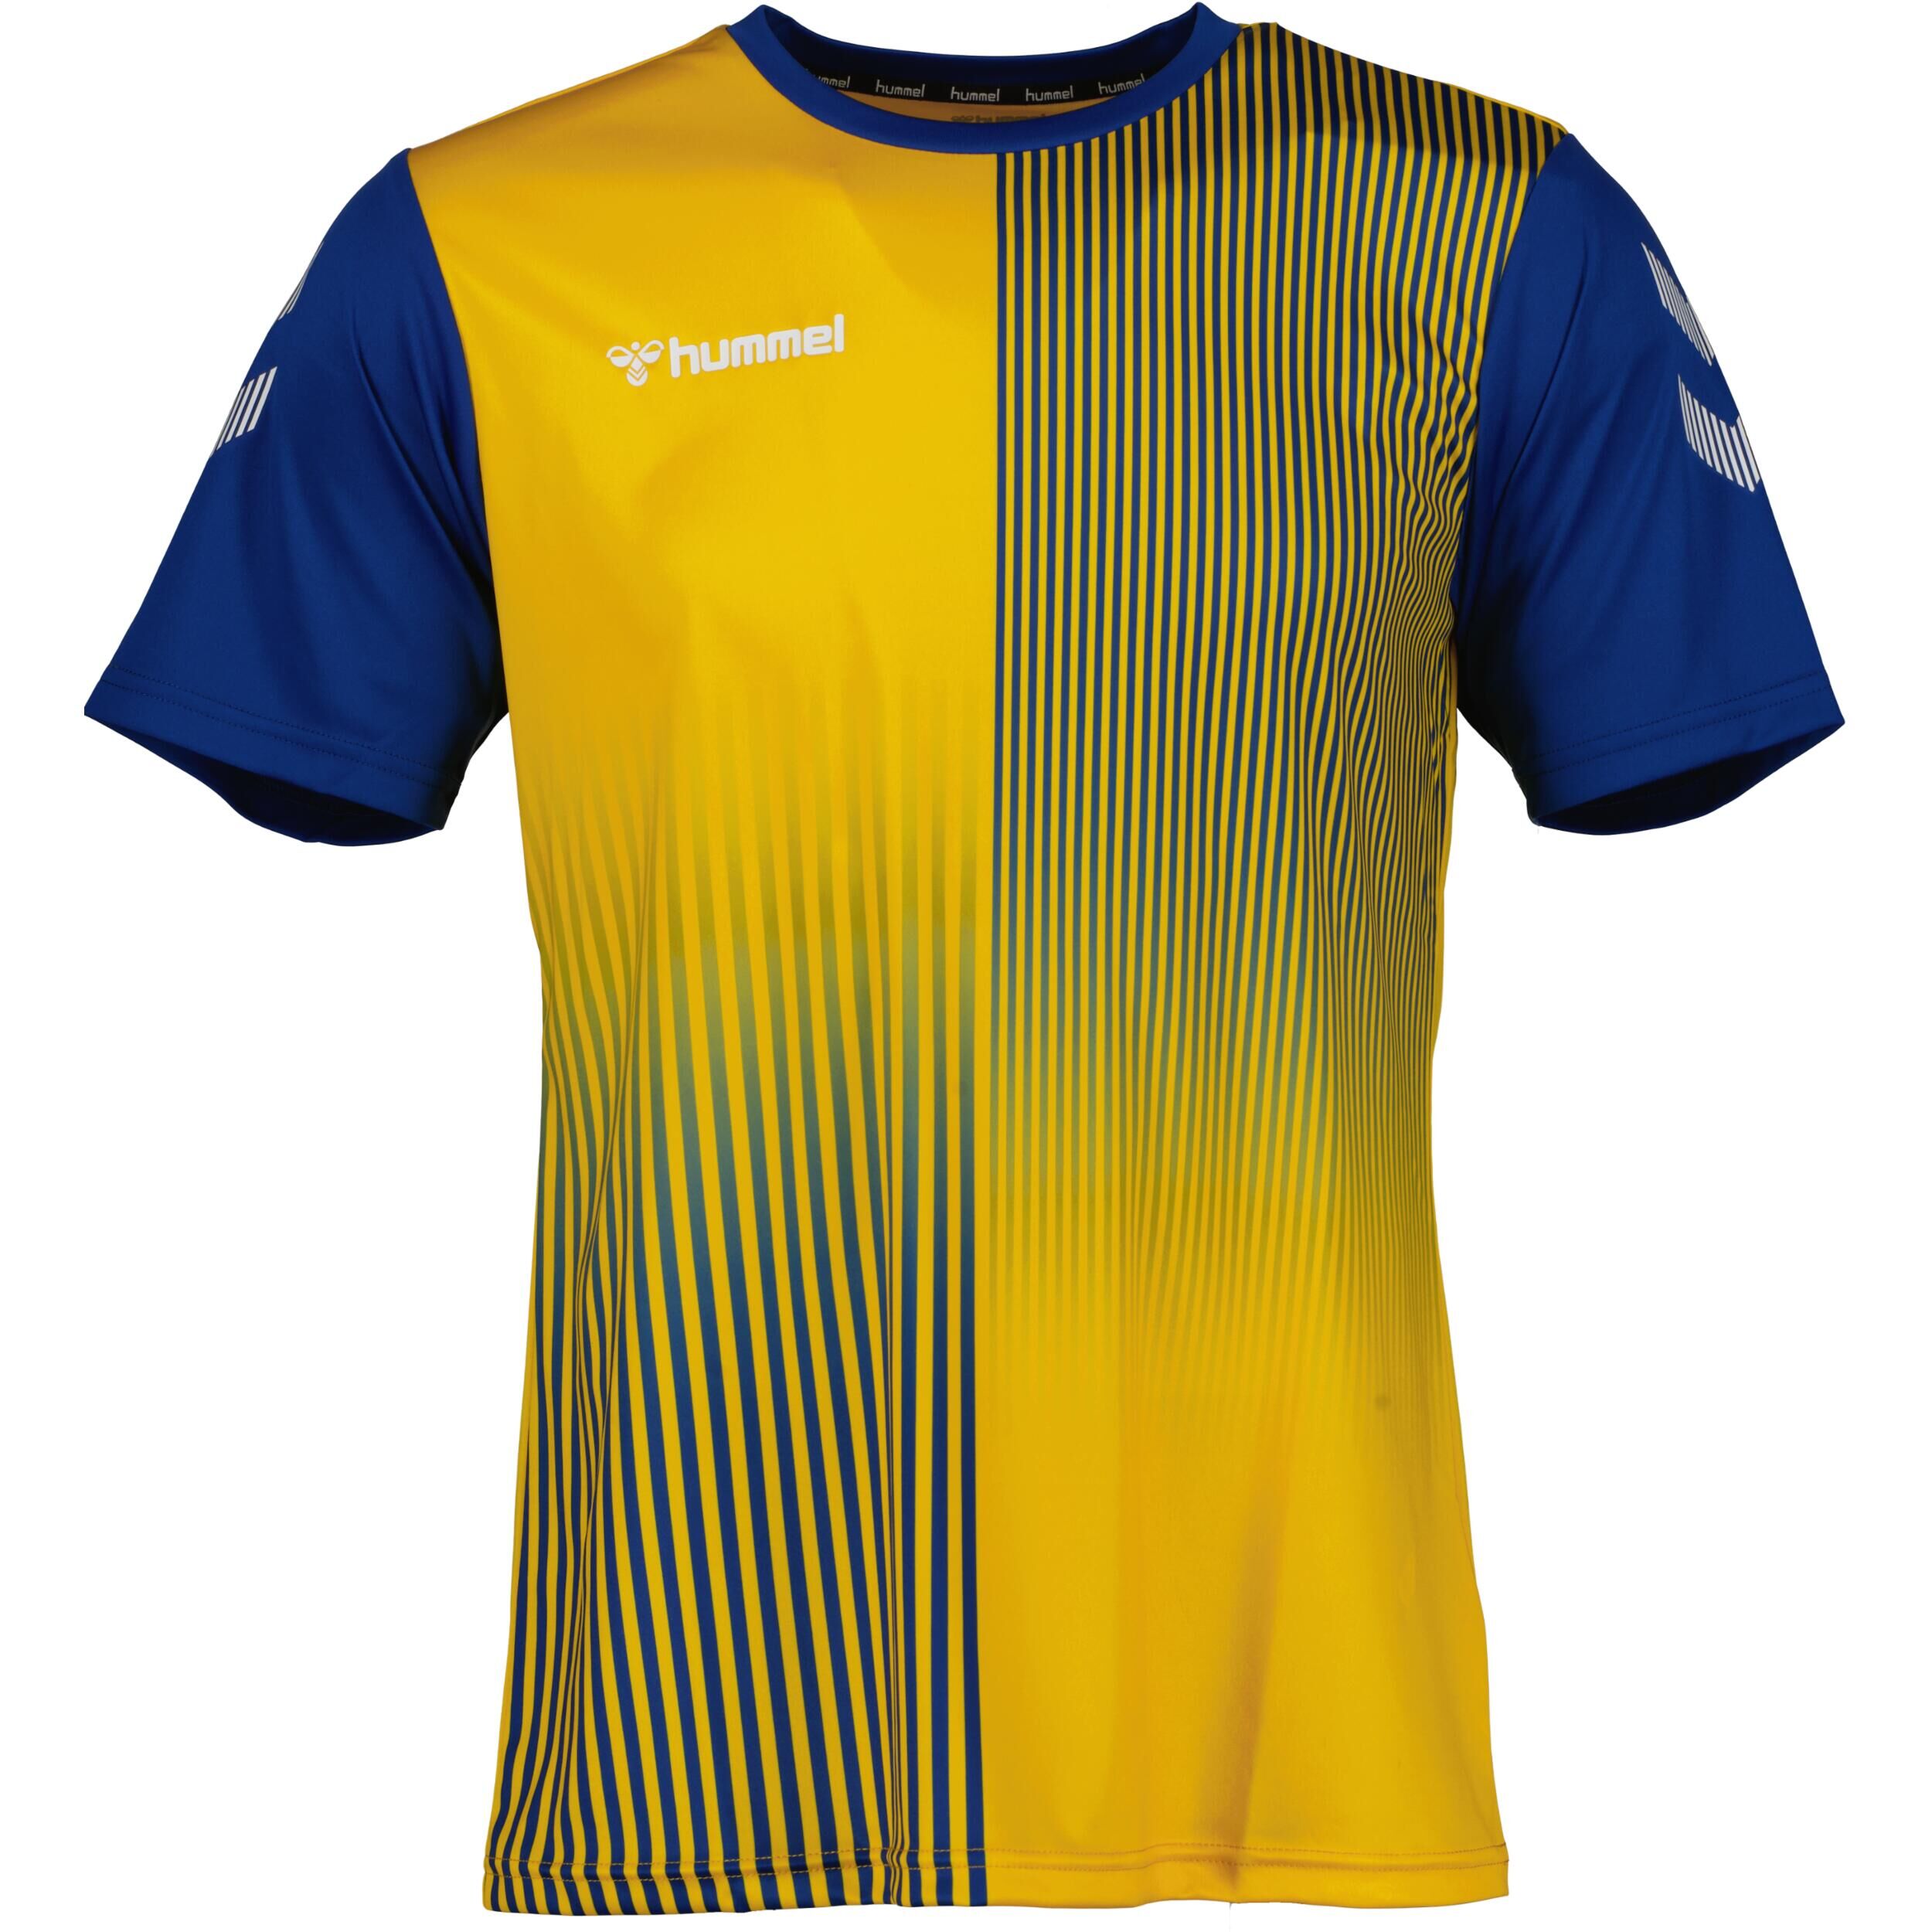 HUMMEL Mexico jersey for men, great for football, in true blue/sports yellow